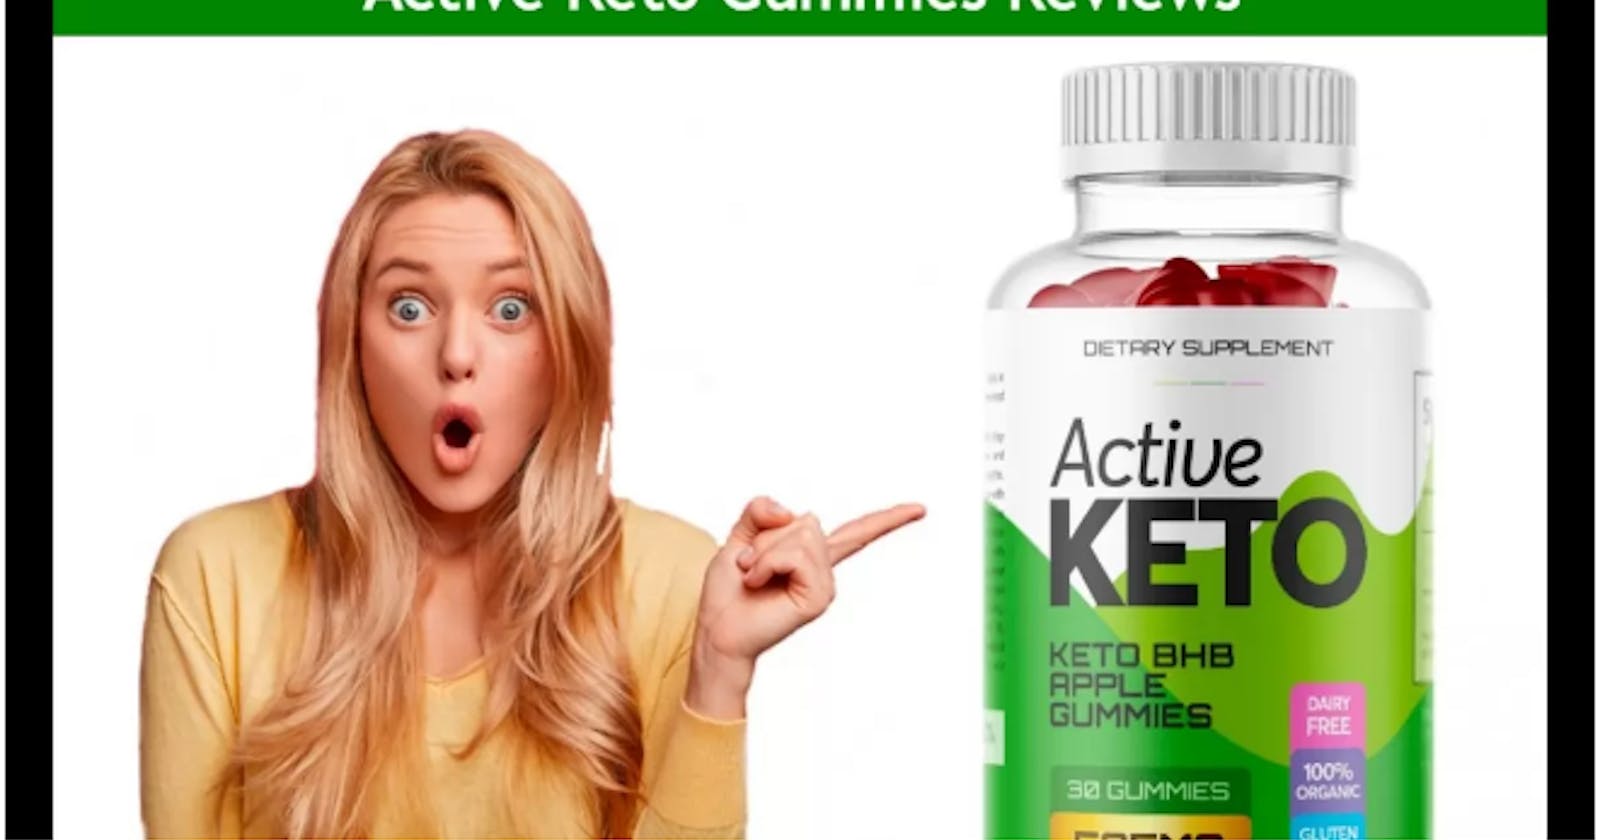 Active Keto Gummies South Africa & Supplement Scam Exposed, Expained (Weight Loss, Keto Diet)